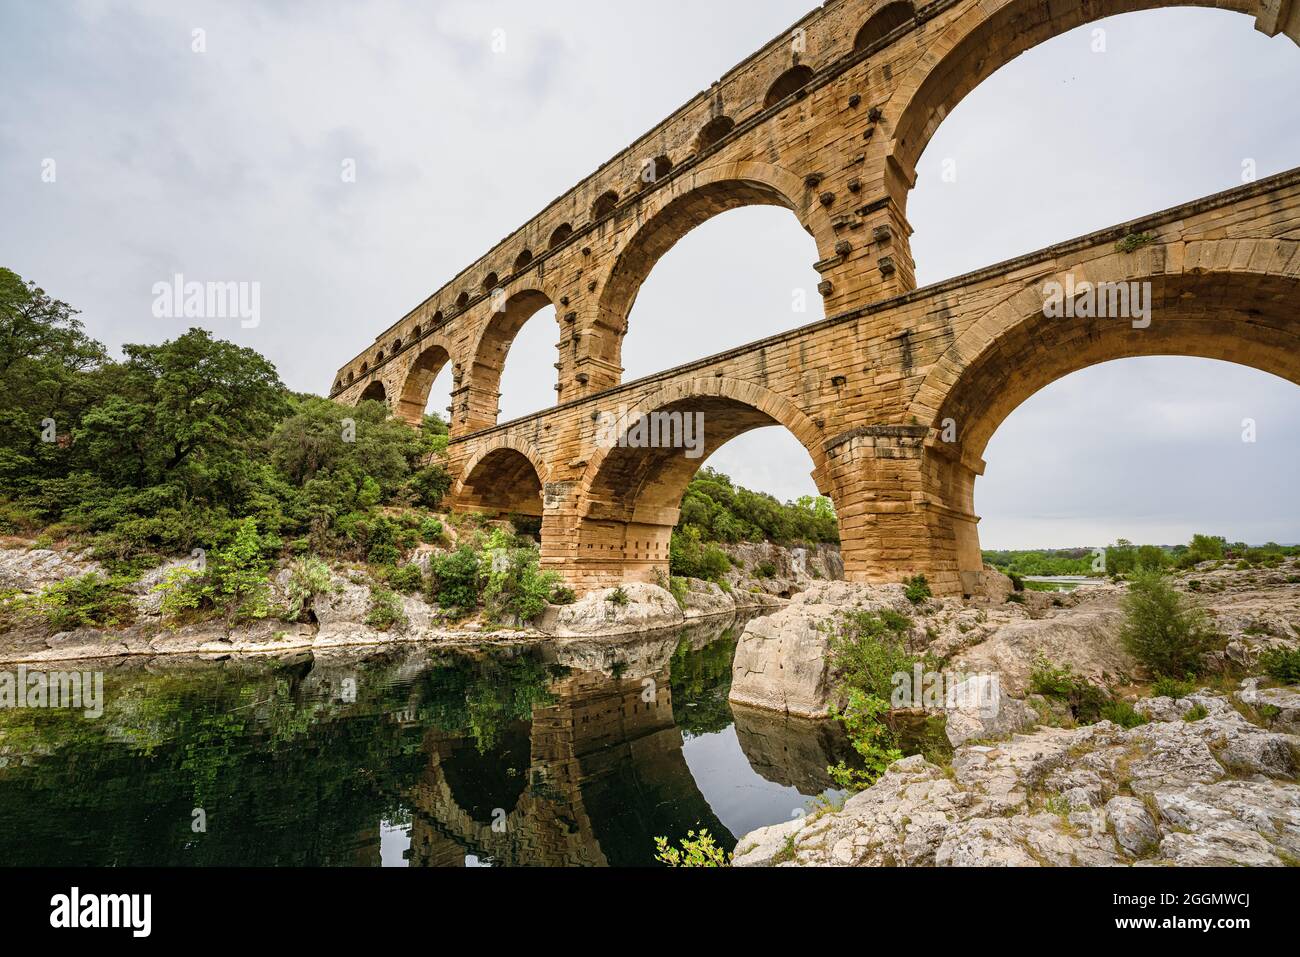 Low angle view of a Roman Empire aqueduct, Pont du Gard in France. Ancient civilisation engineering for water supply. Stock Photo